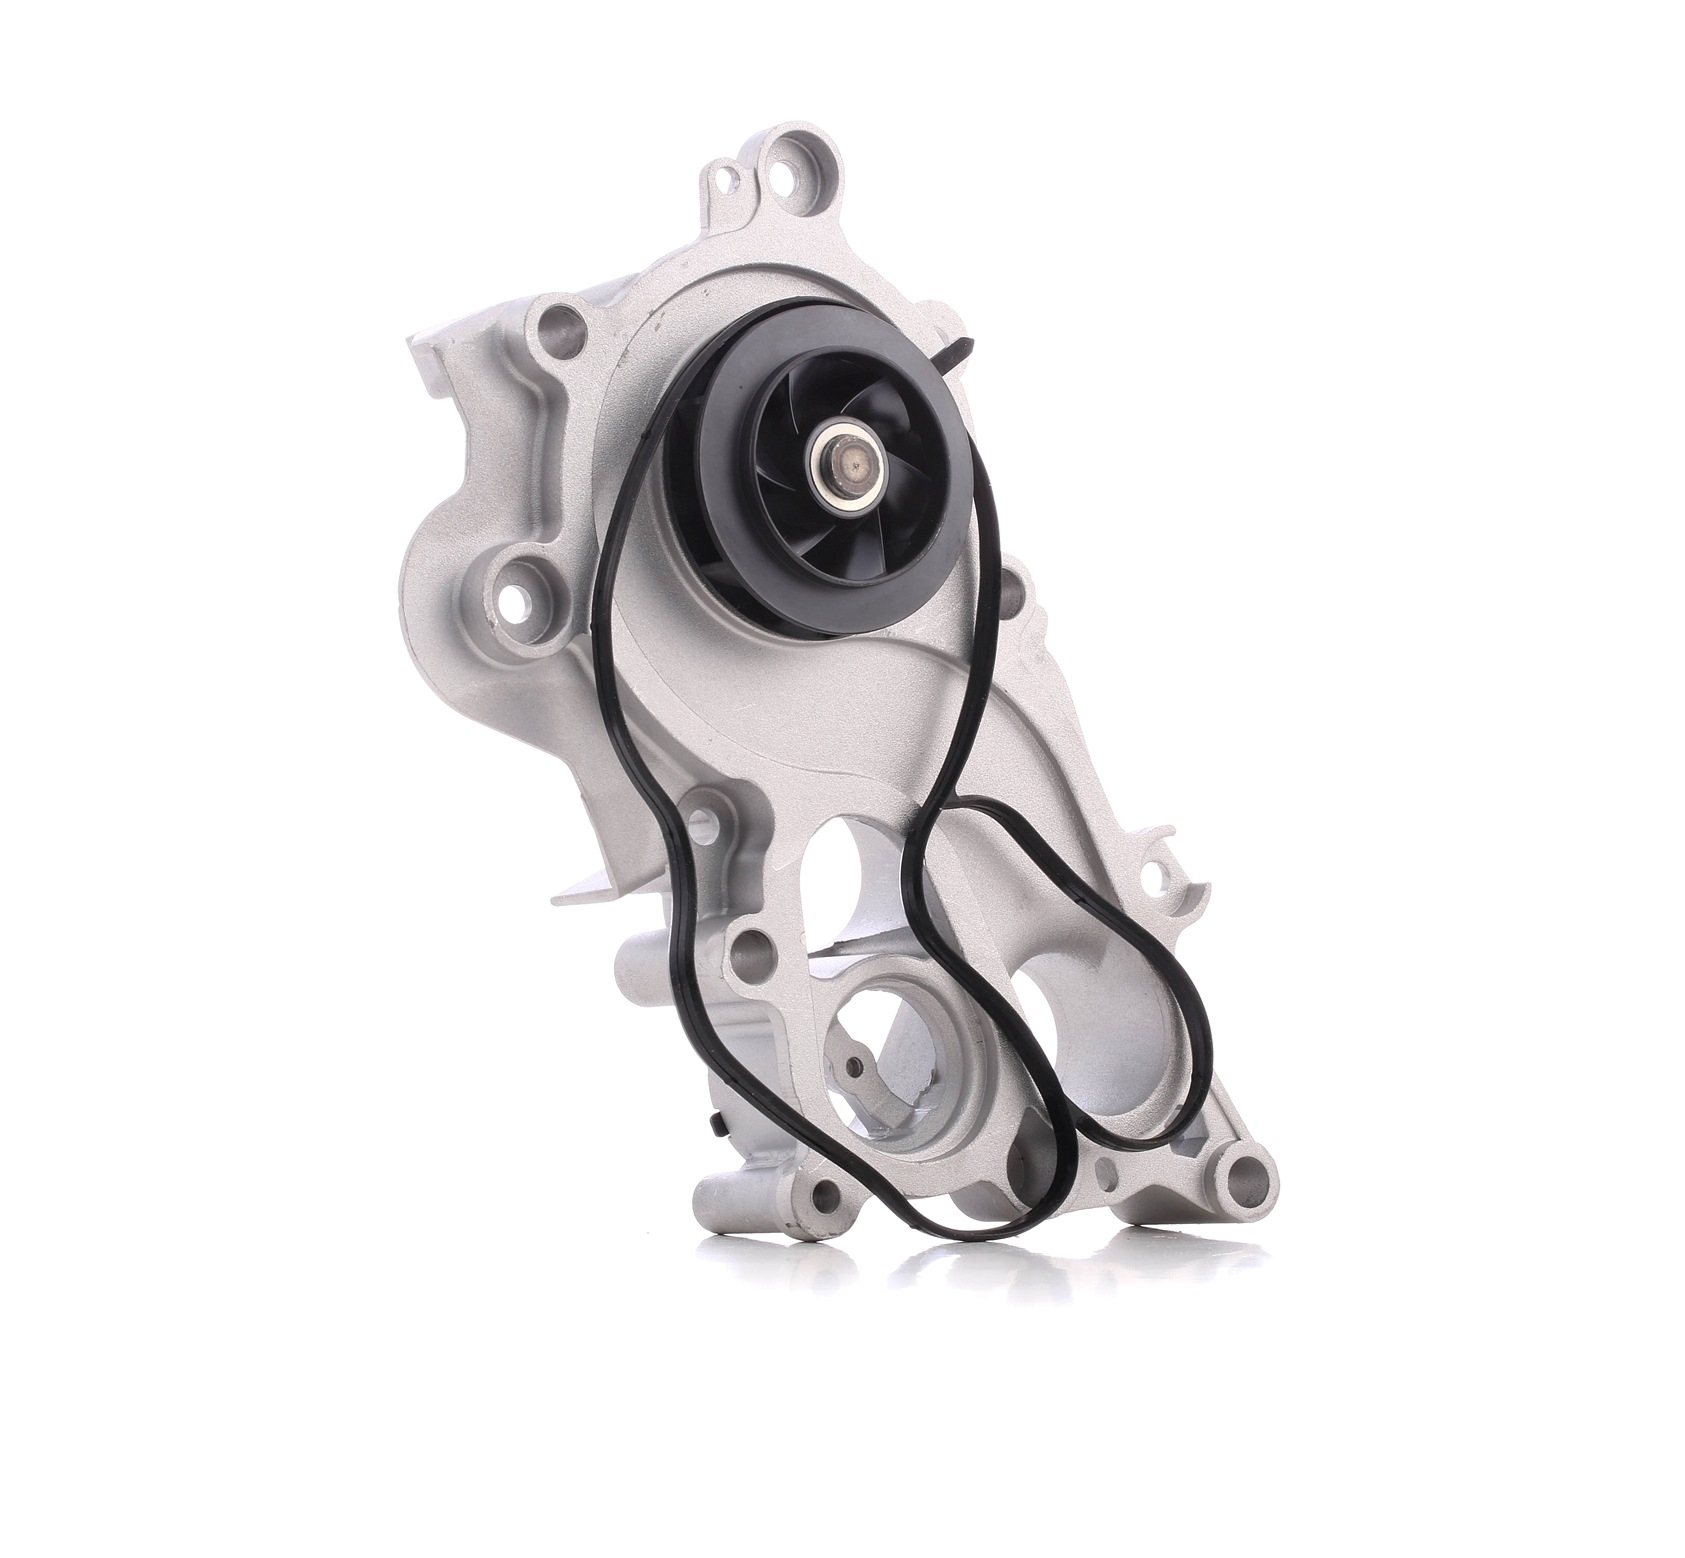 RIDEX 1260W0355 Water pump Number of Teeth: 28, with seal, Incl. Gasket Set, without lid, Mechanical, Metal, Water Pump Pulley Ø: 43,4 mm, for v-ribbed belt use, for timing belt drive